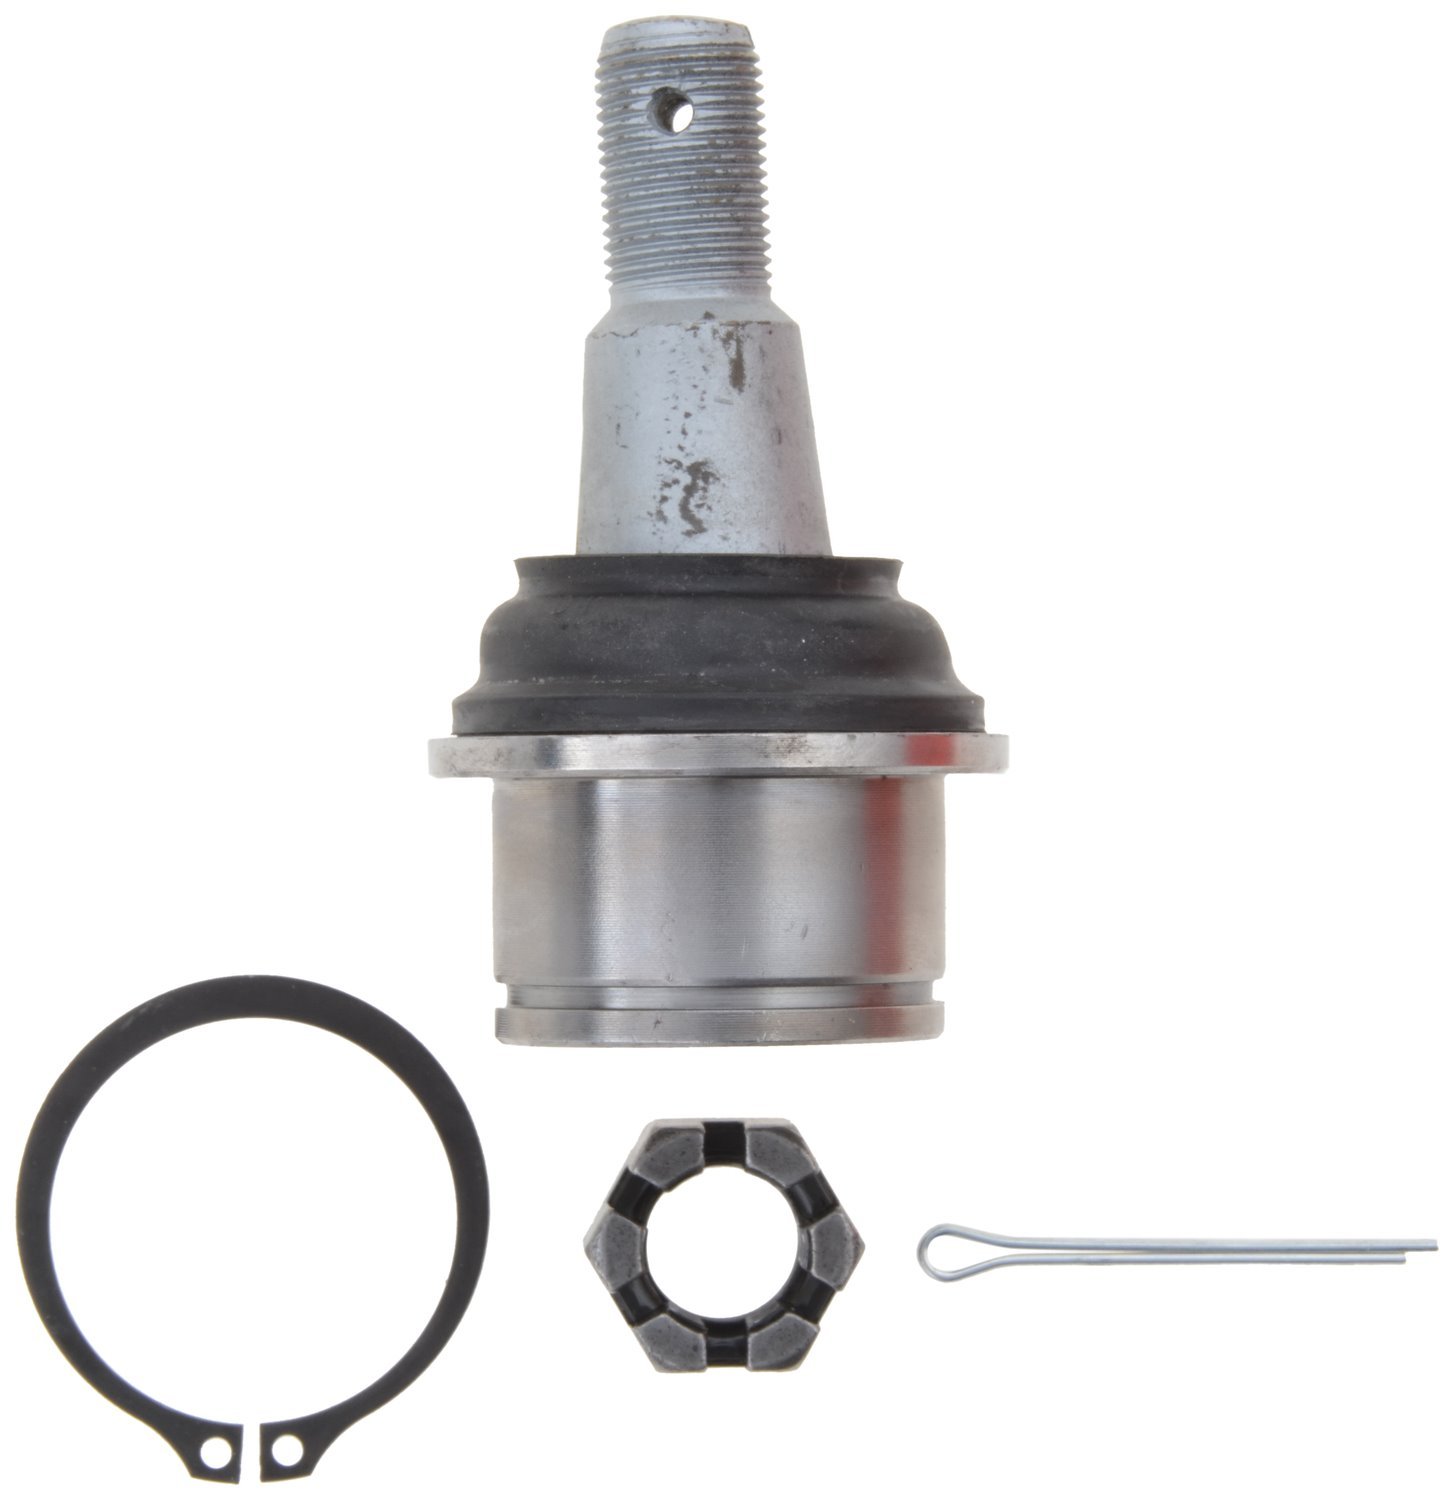 JBJ1030 Ball Joint Fits Select Ford Models, Position: Left/Driver or Right/Passenger, Front Lower